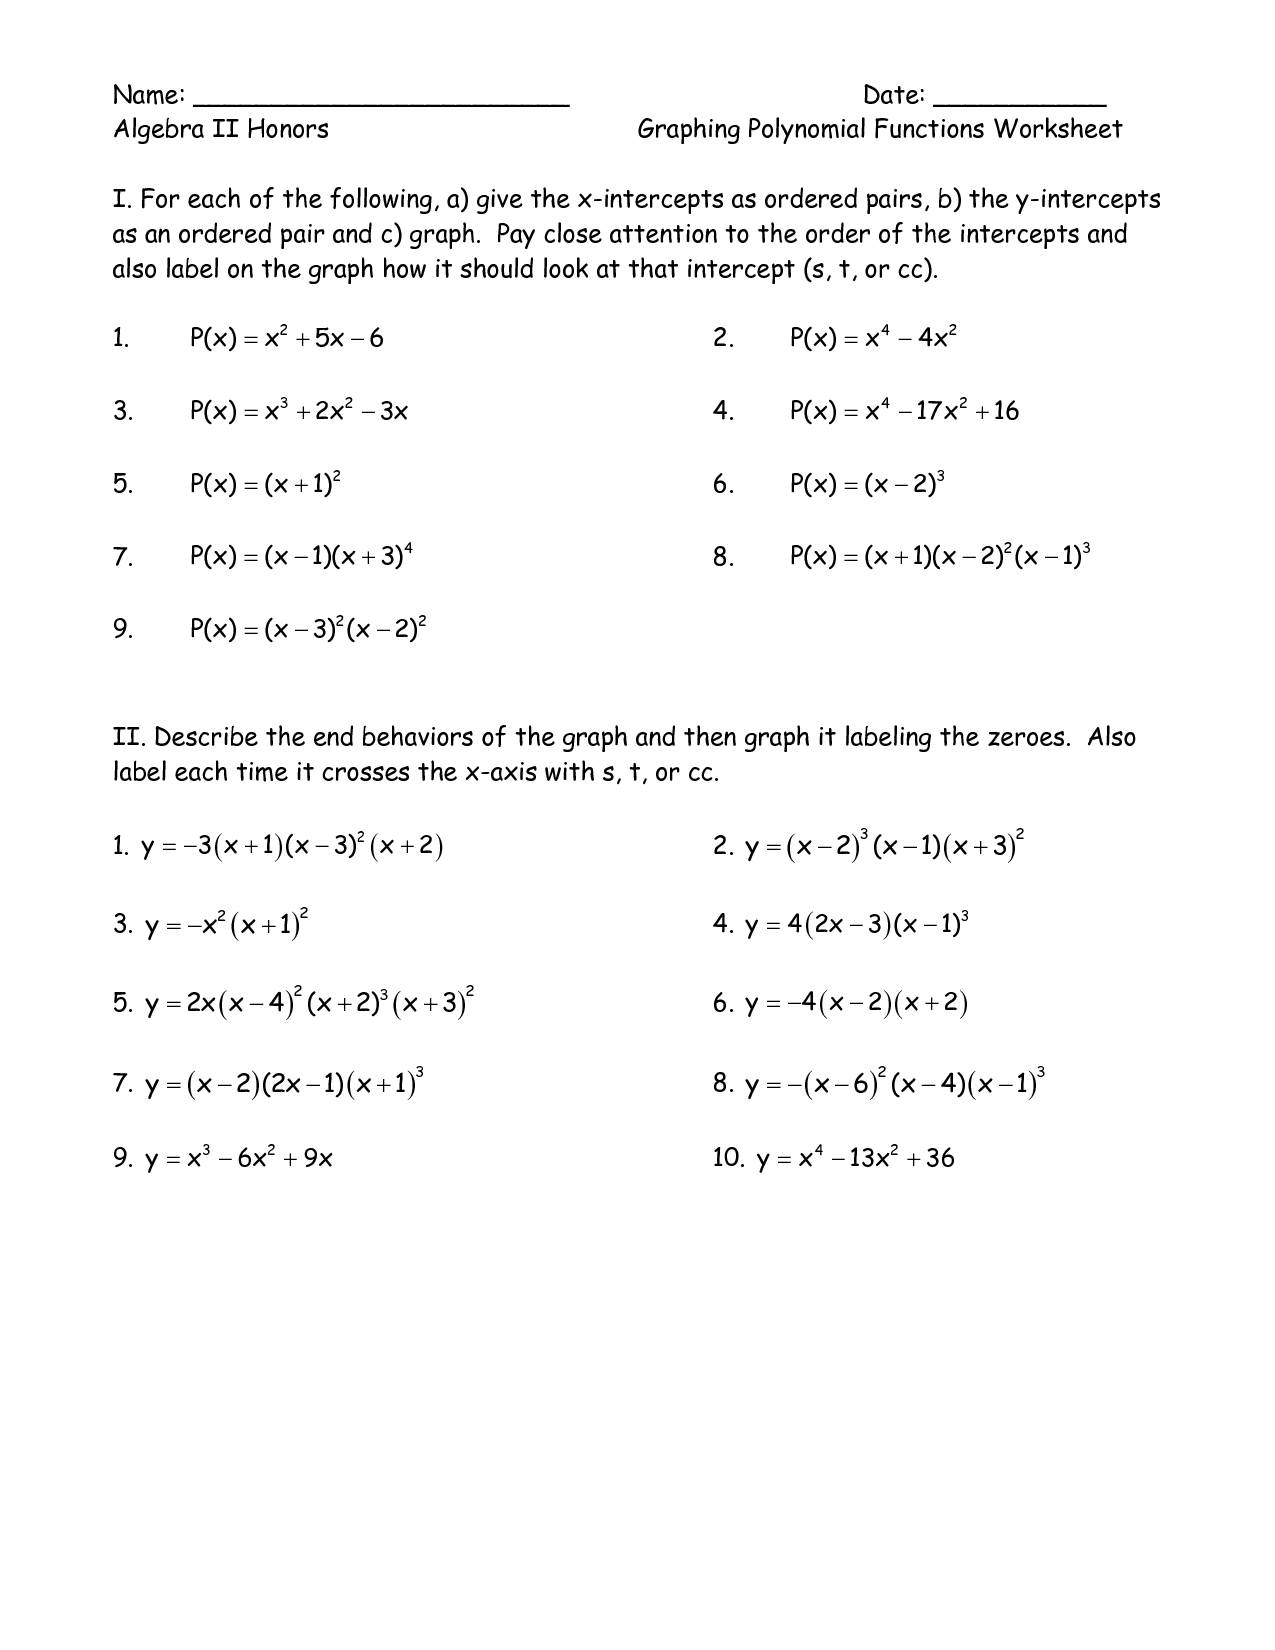 polynomial-long-division-worksheet-with-answers